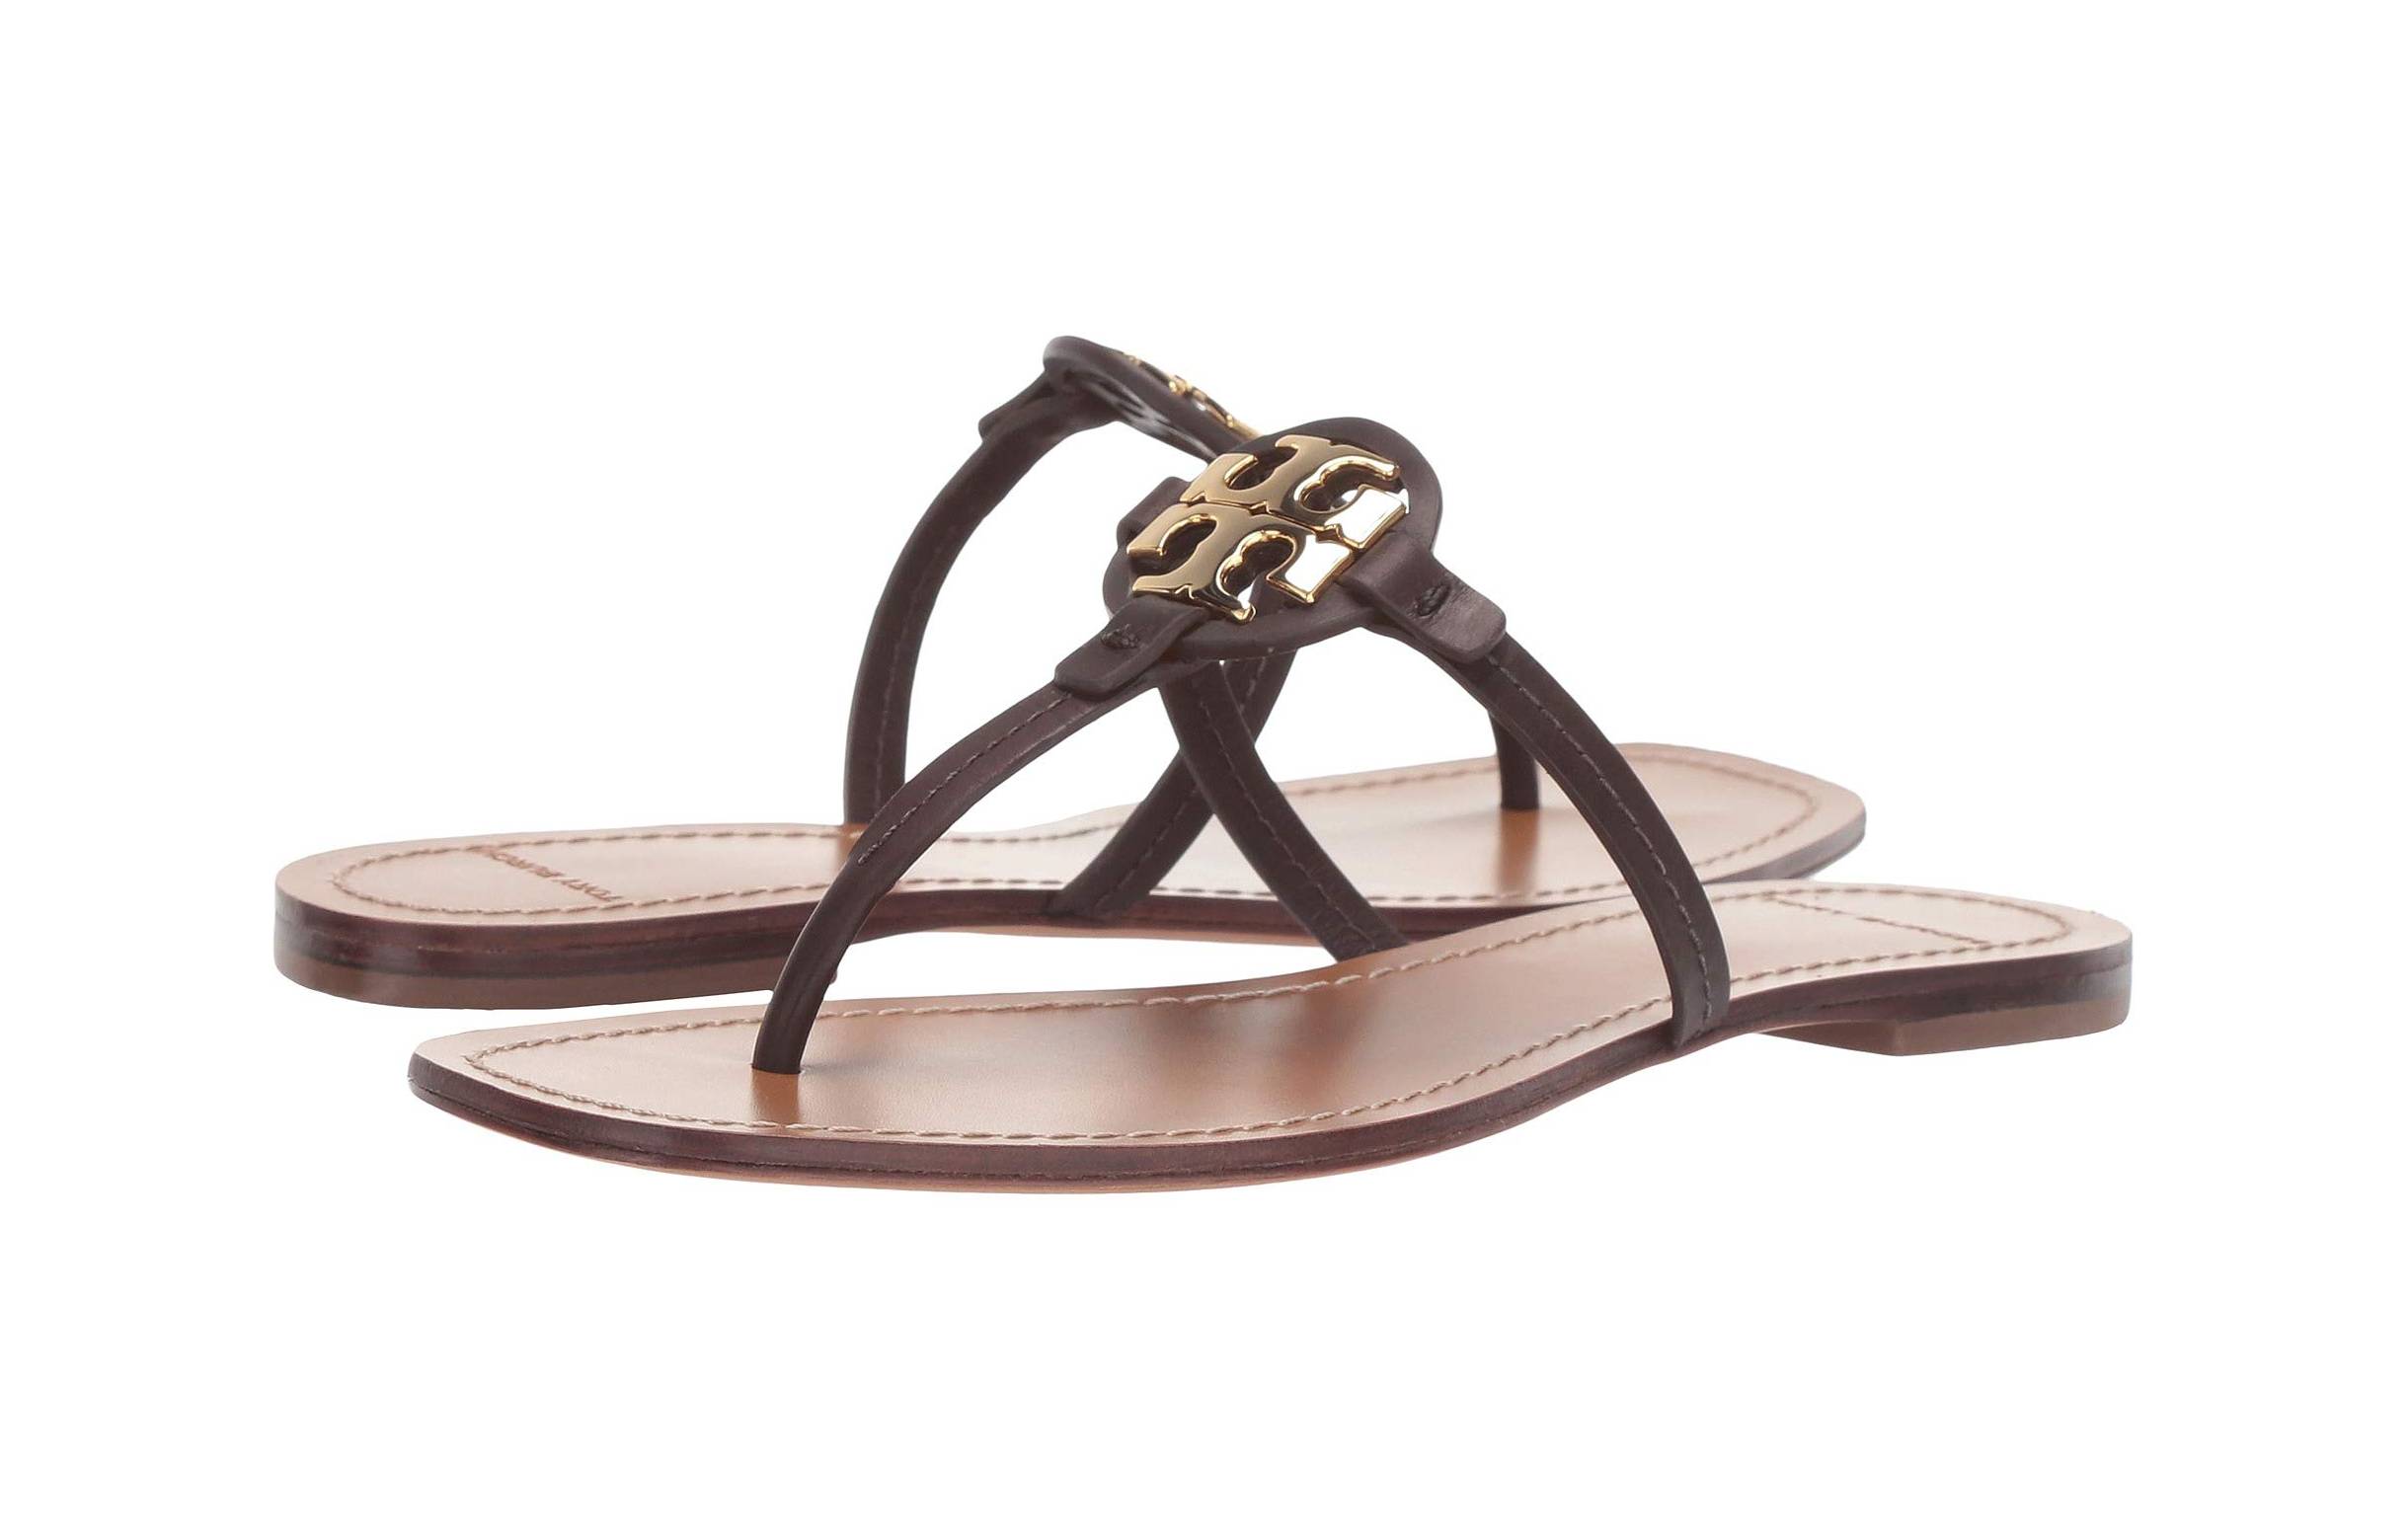 Tory Burch Mini Miller Sandals Are on Sale for 40% Off Right Now